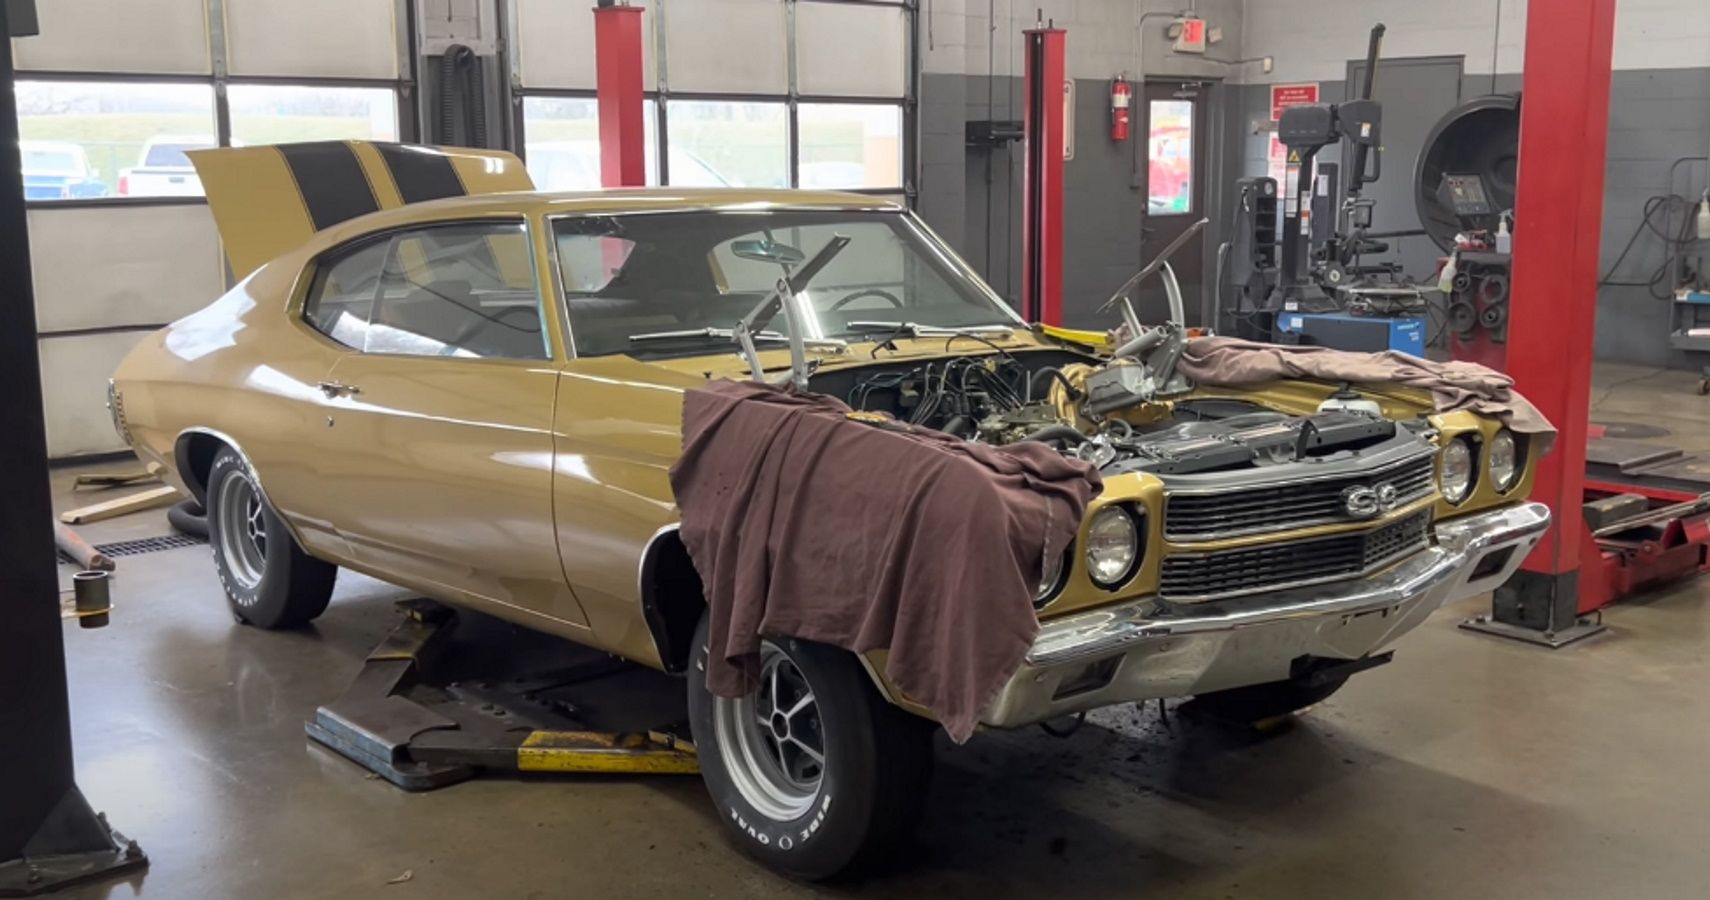 A mostly restored 1970 Chevrolet Chevelle SS 454 in Champagne Gold